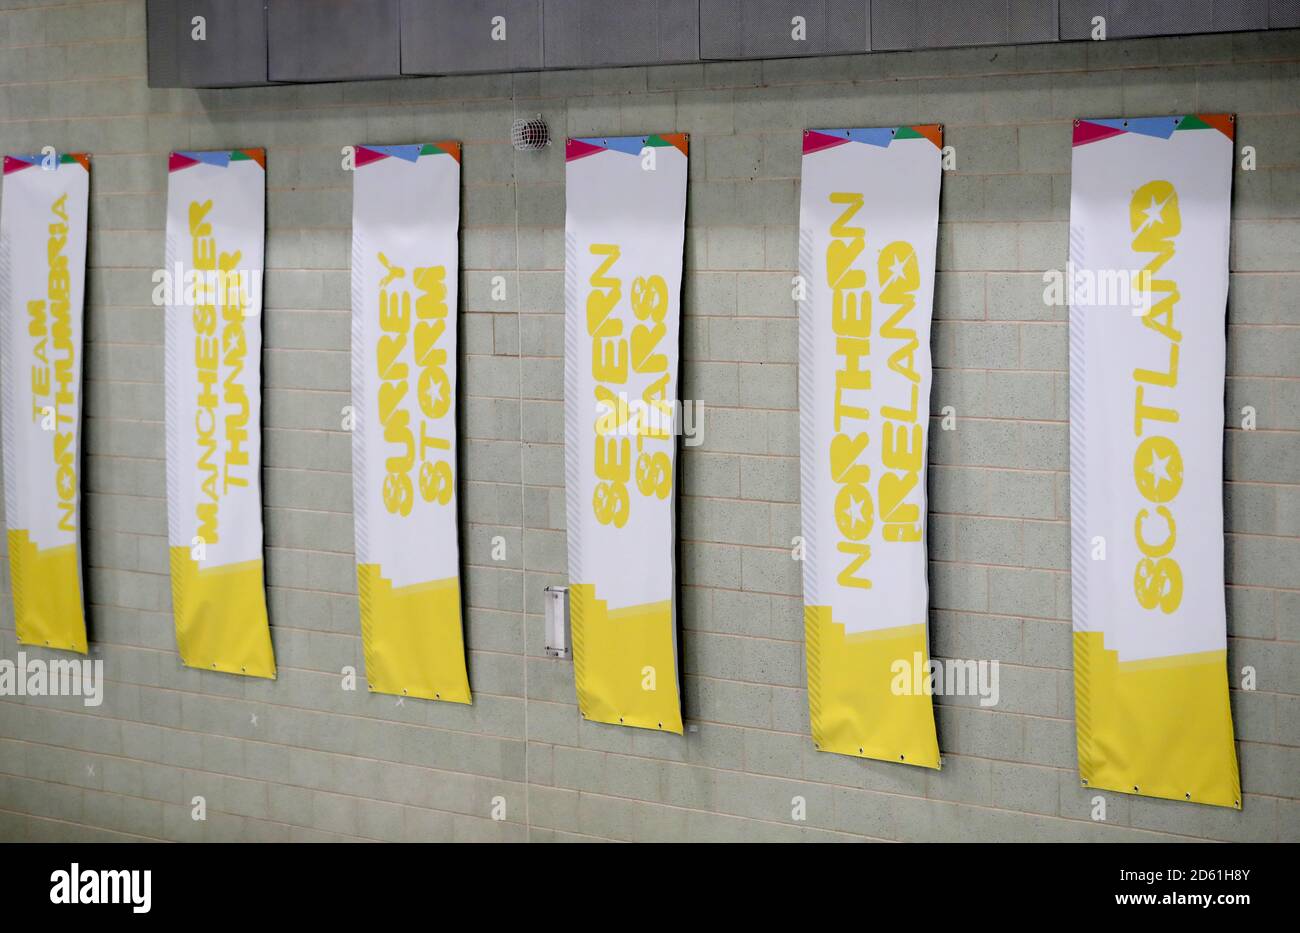 A general view of team banners on display in the Netball during the 2018 School Games held at Loughborough University.  Stock Photo